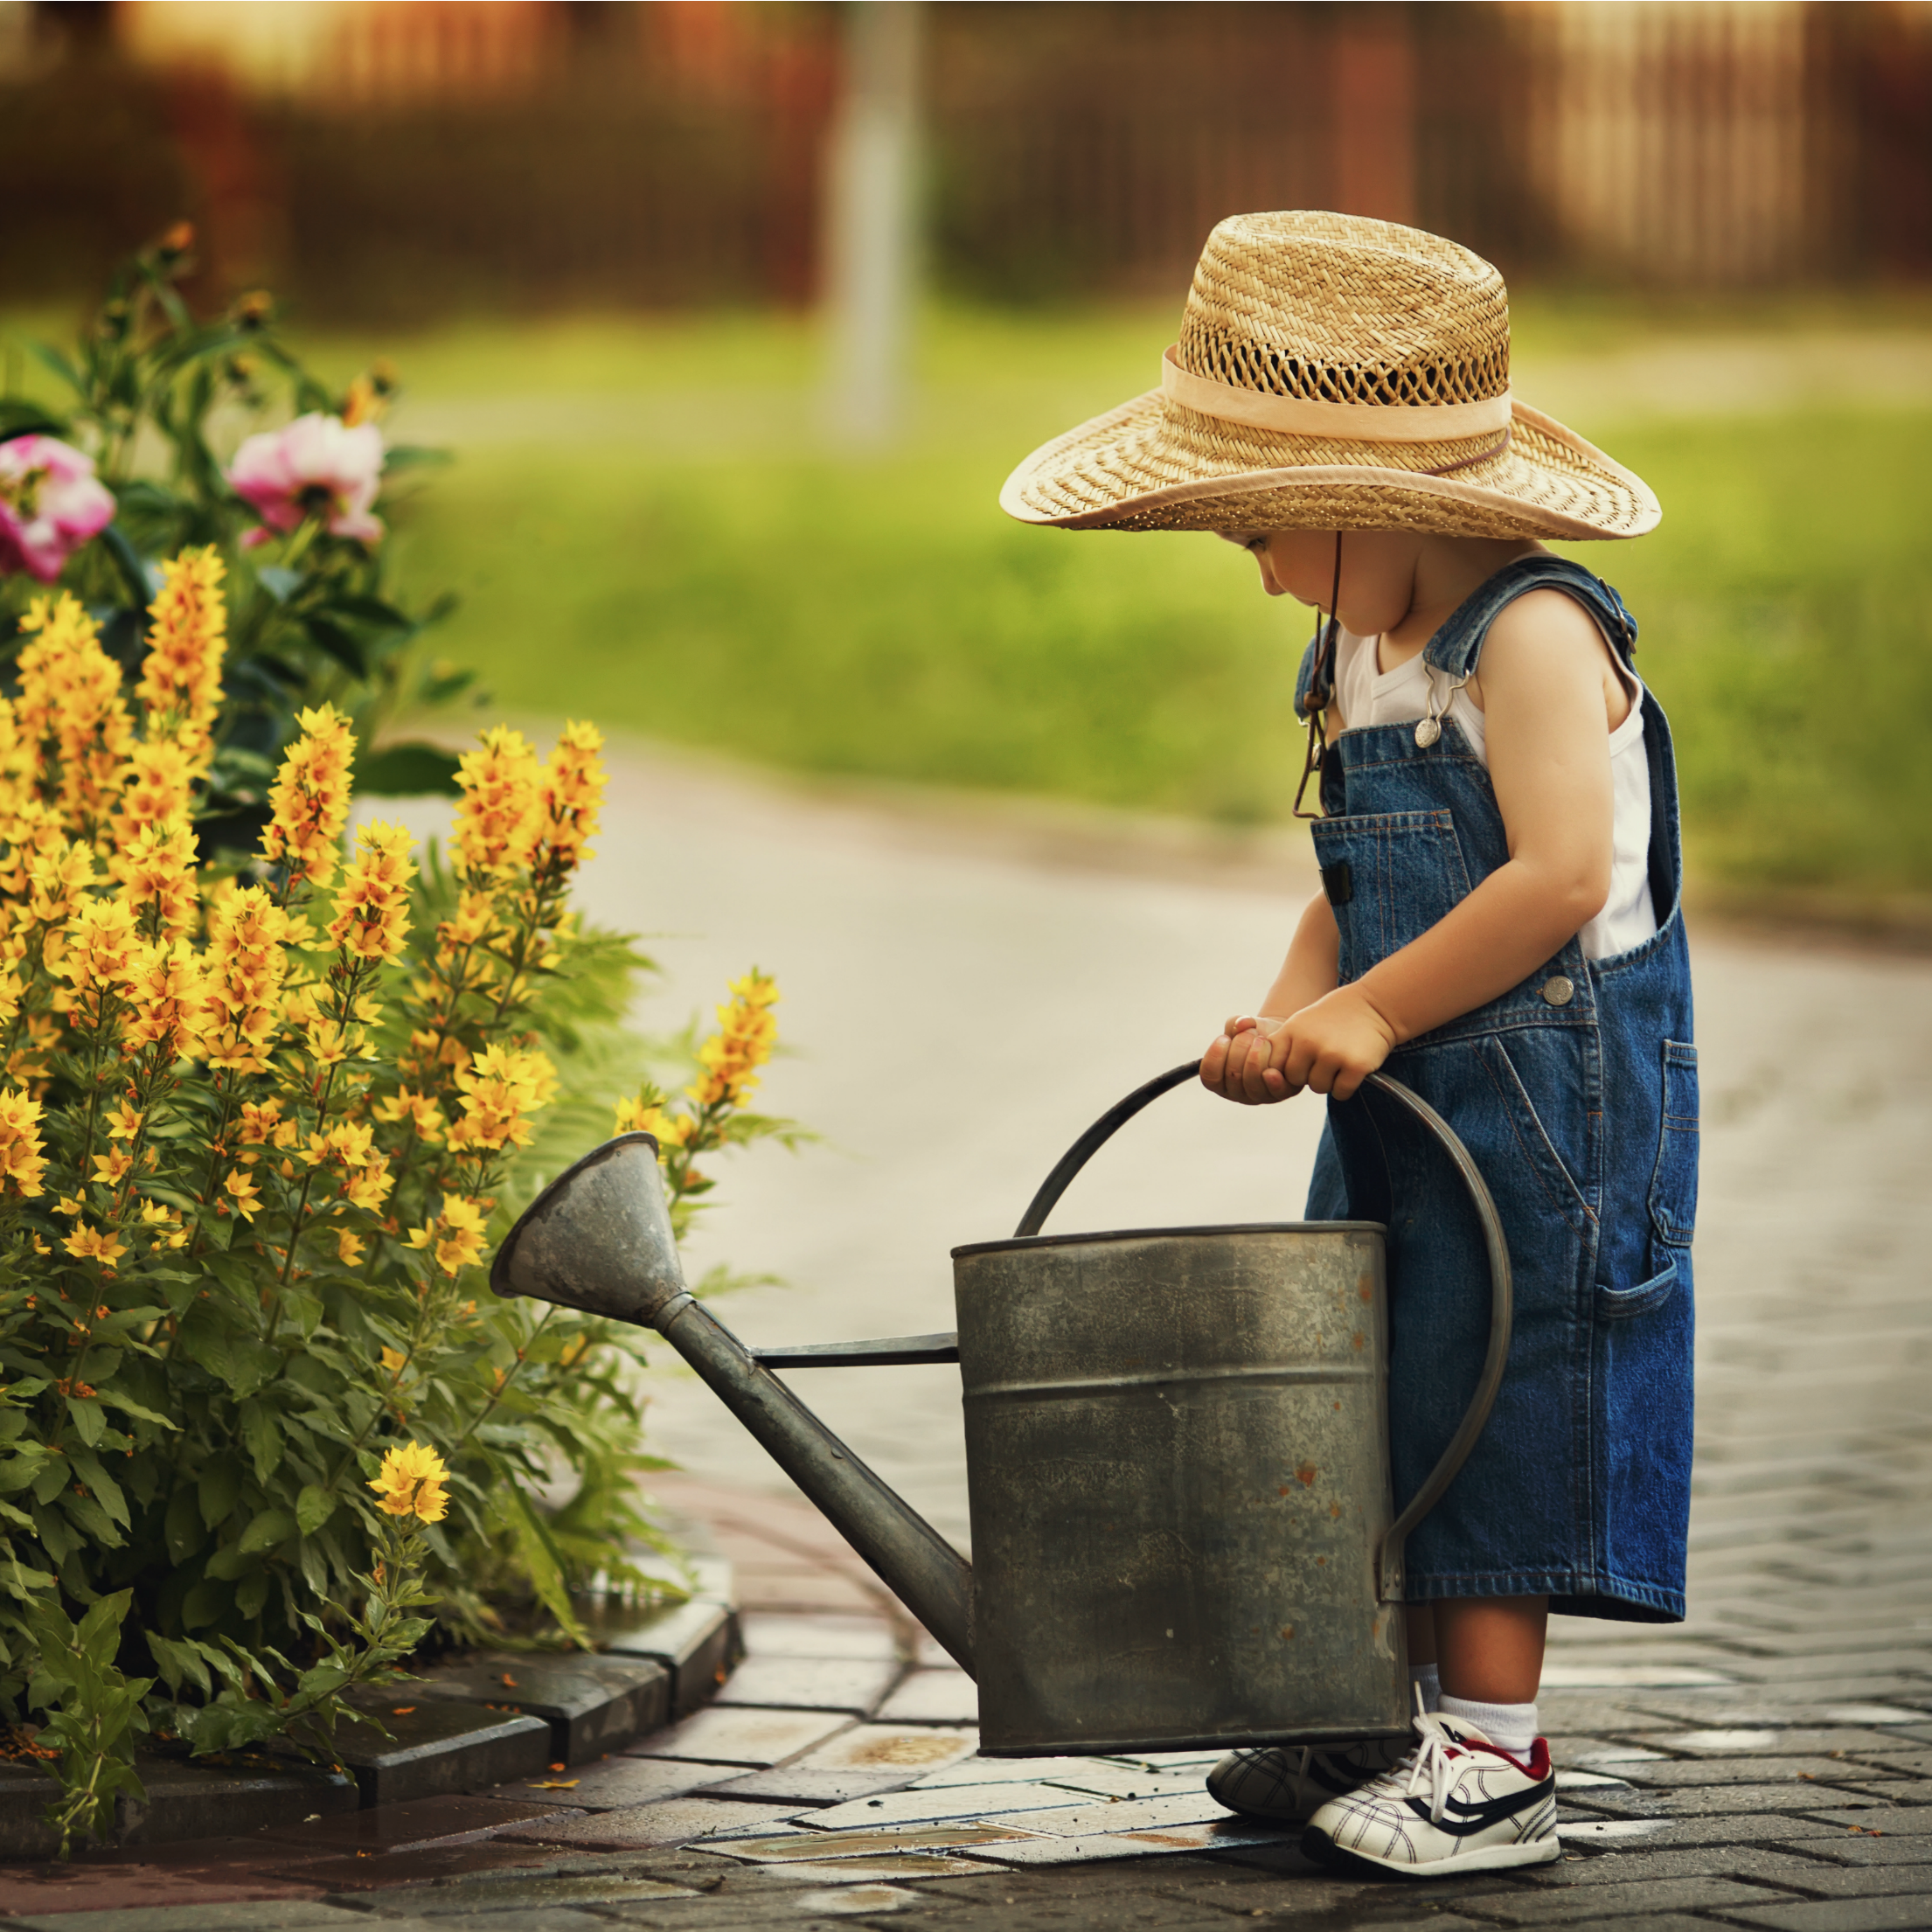 The Gardening Metaphor That Will Make You a Less Anxious Parent